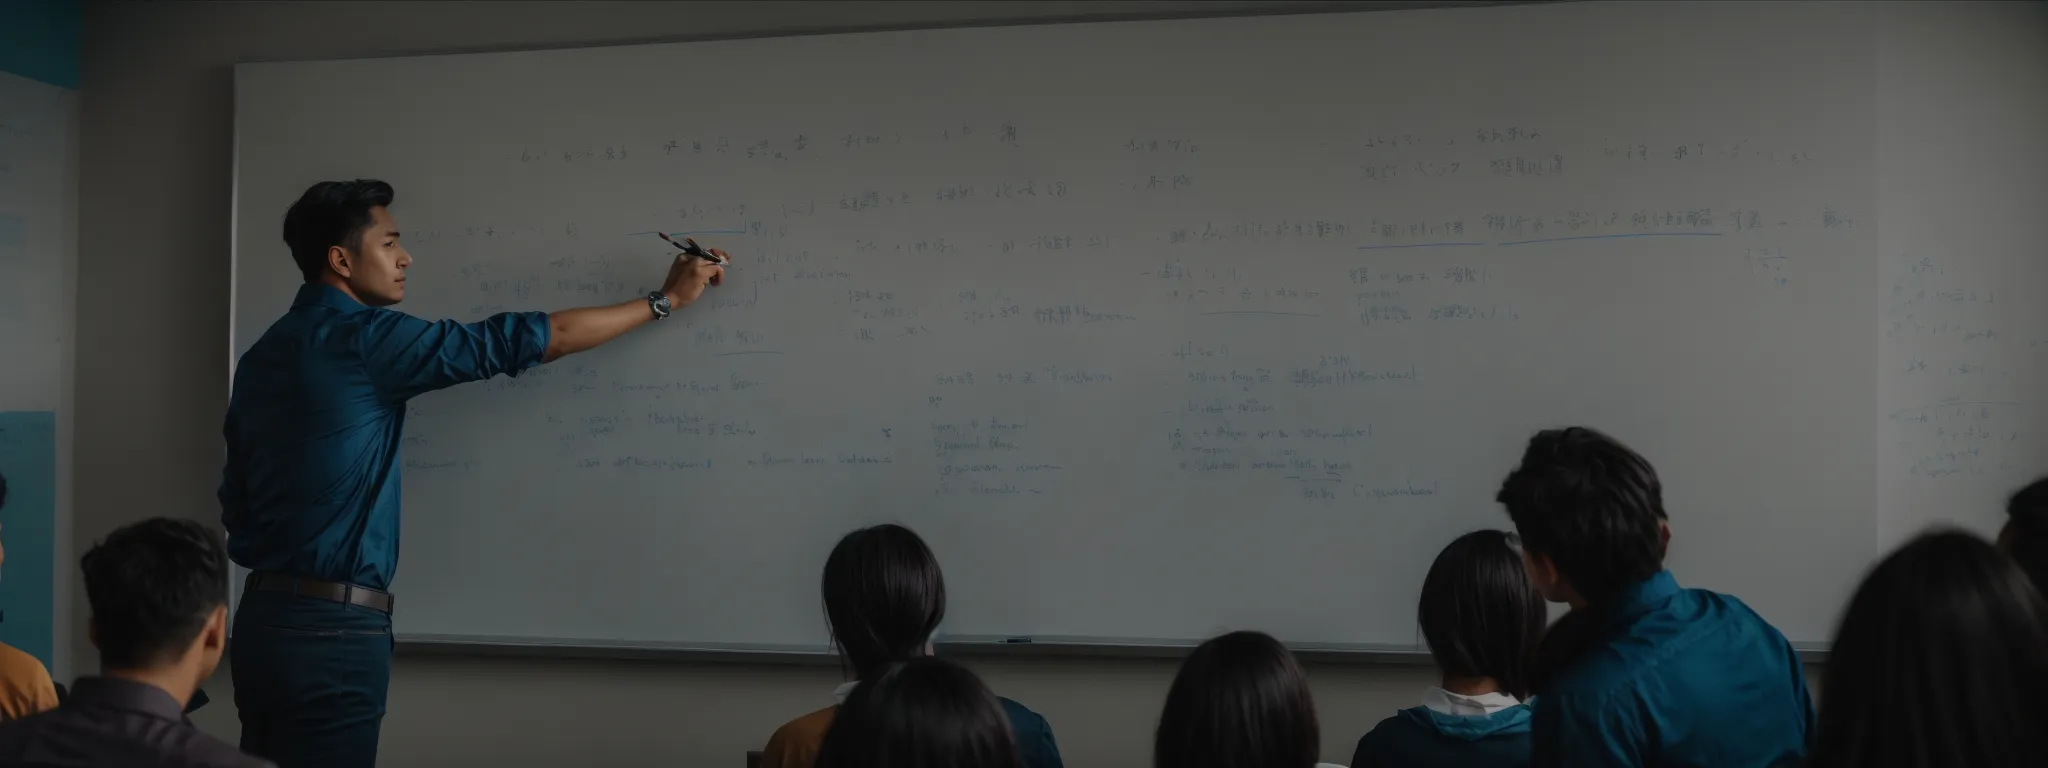 a scholar explaining seo concepts on a whiteboard to a group of attentive students.